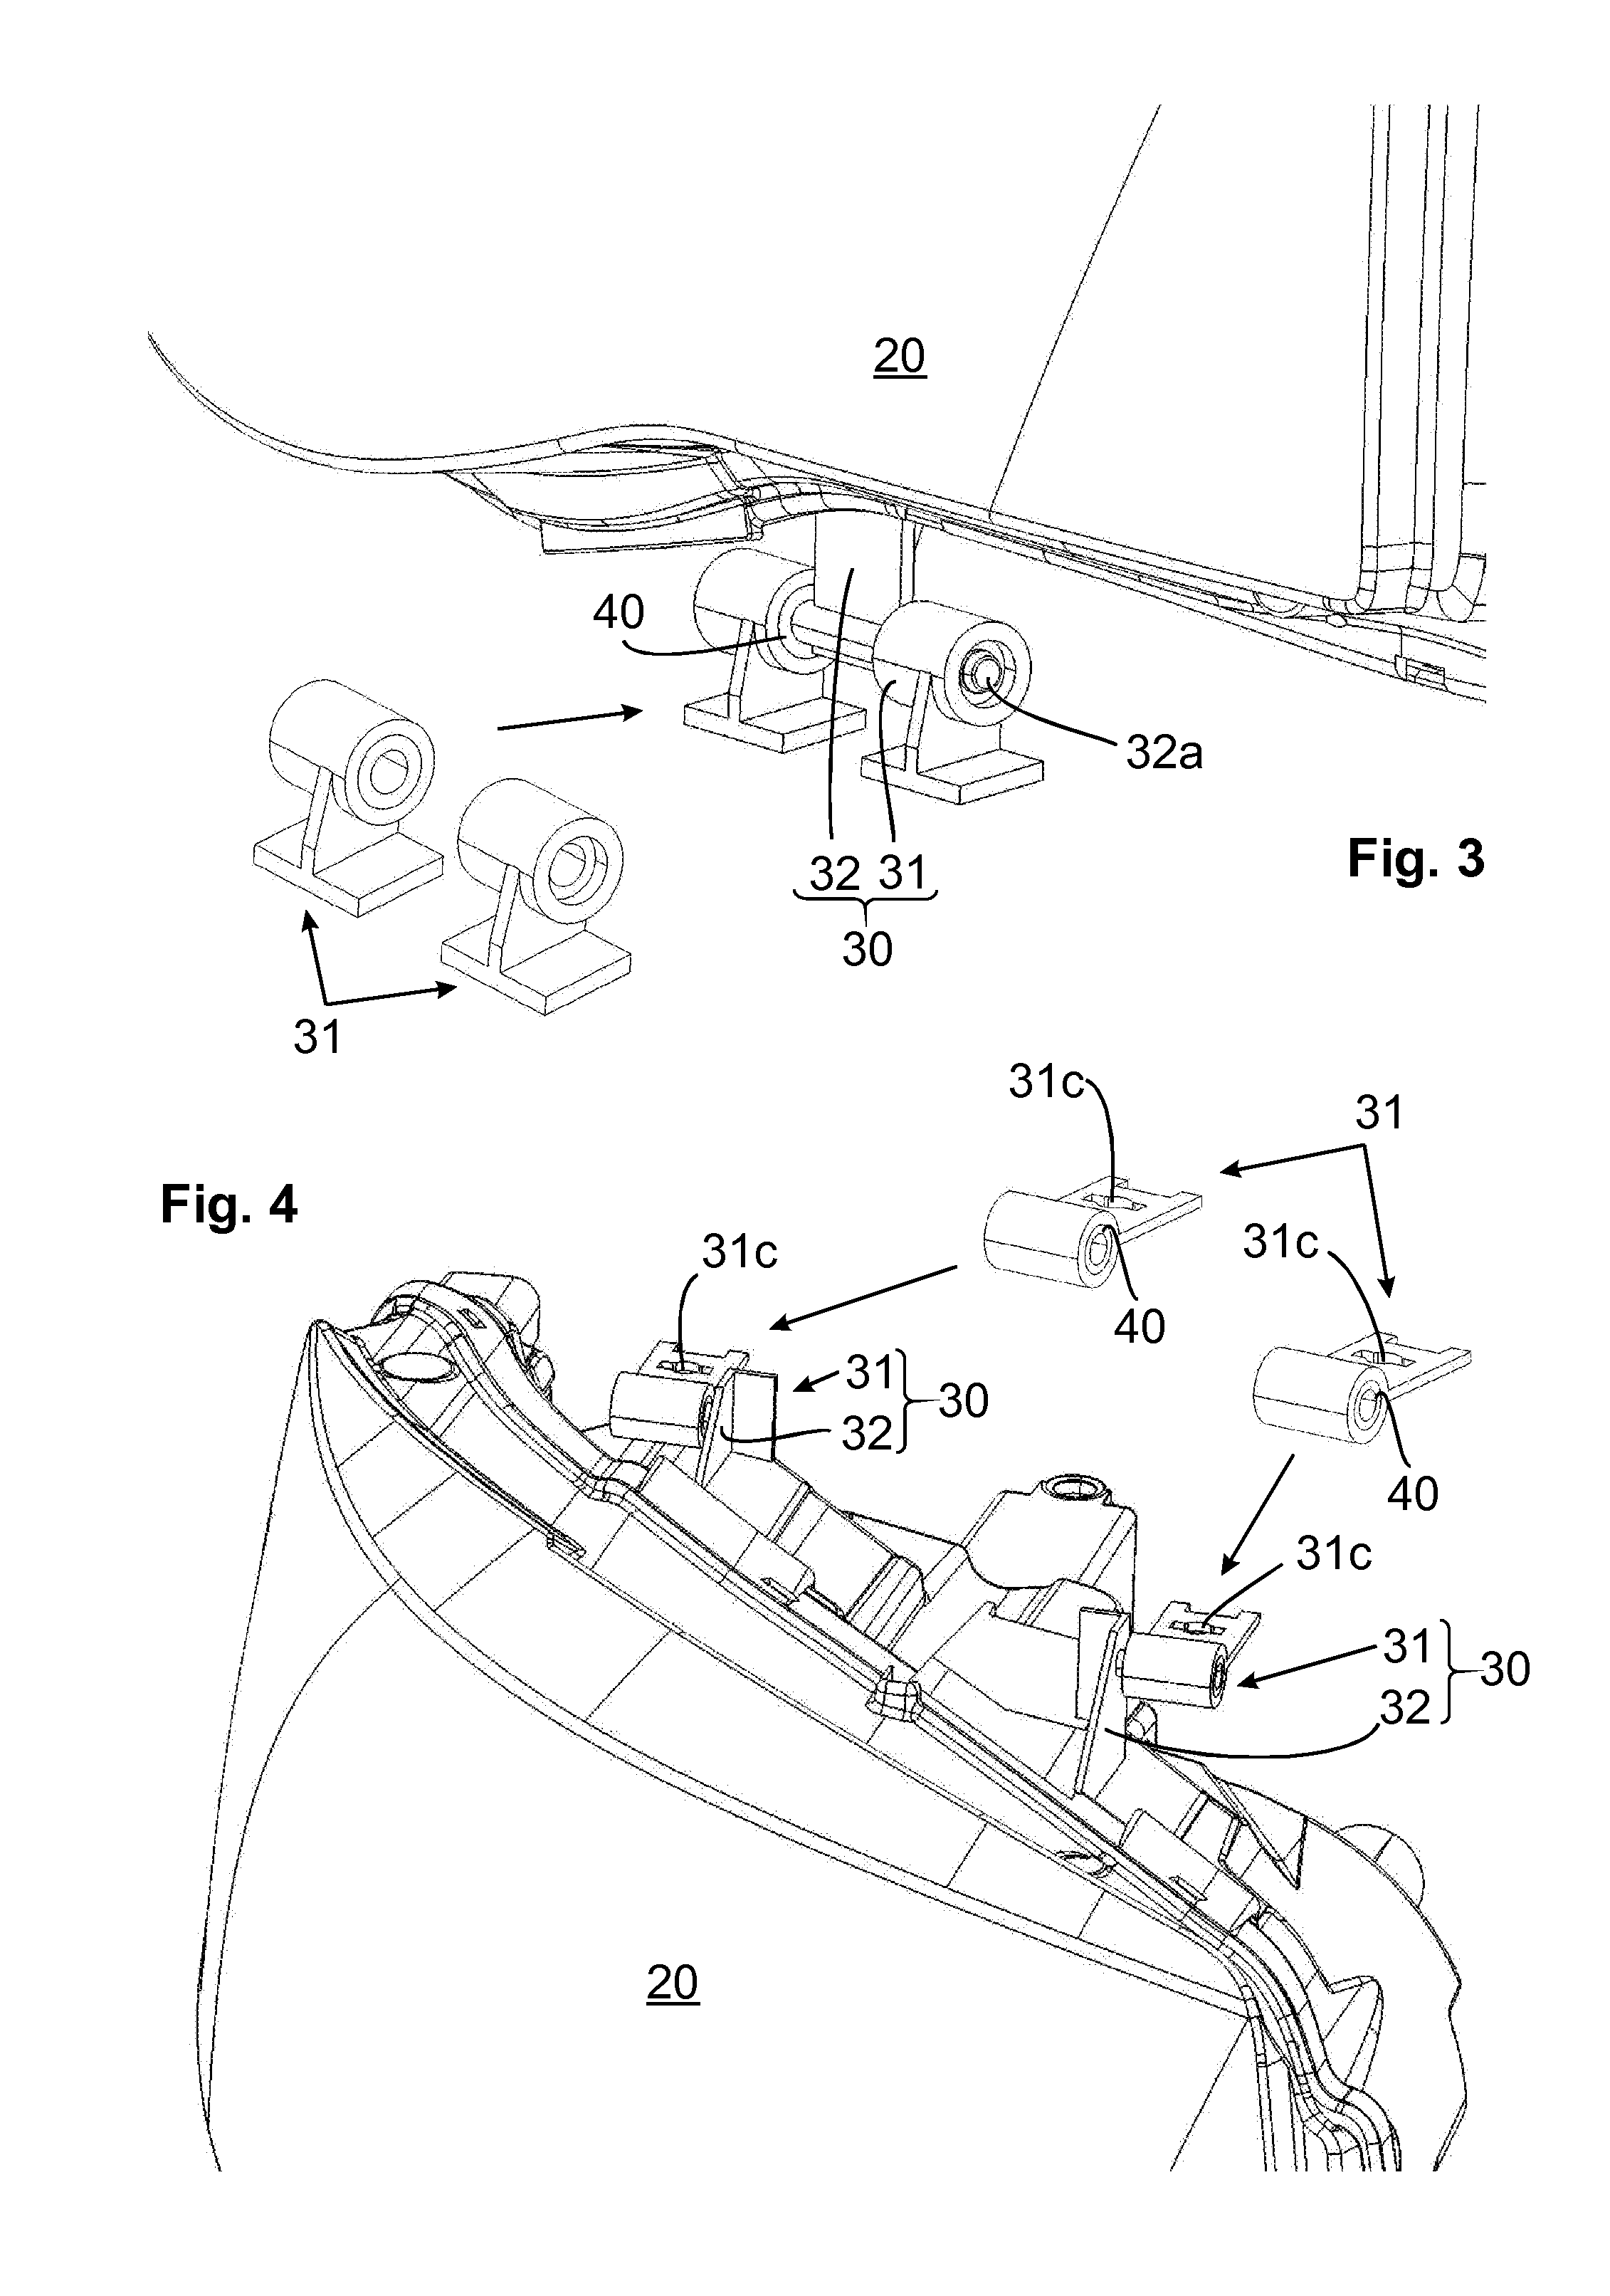 Joining arrangement for joining a first joining partner to a second joining partner of a vehicle